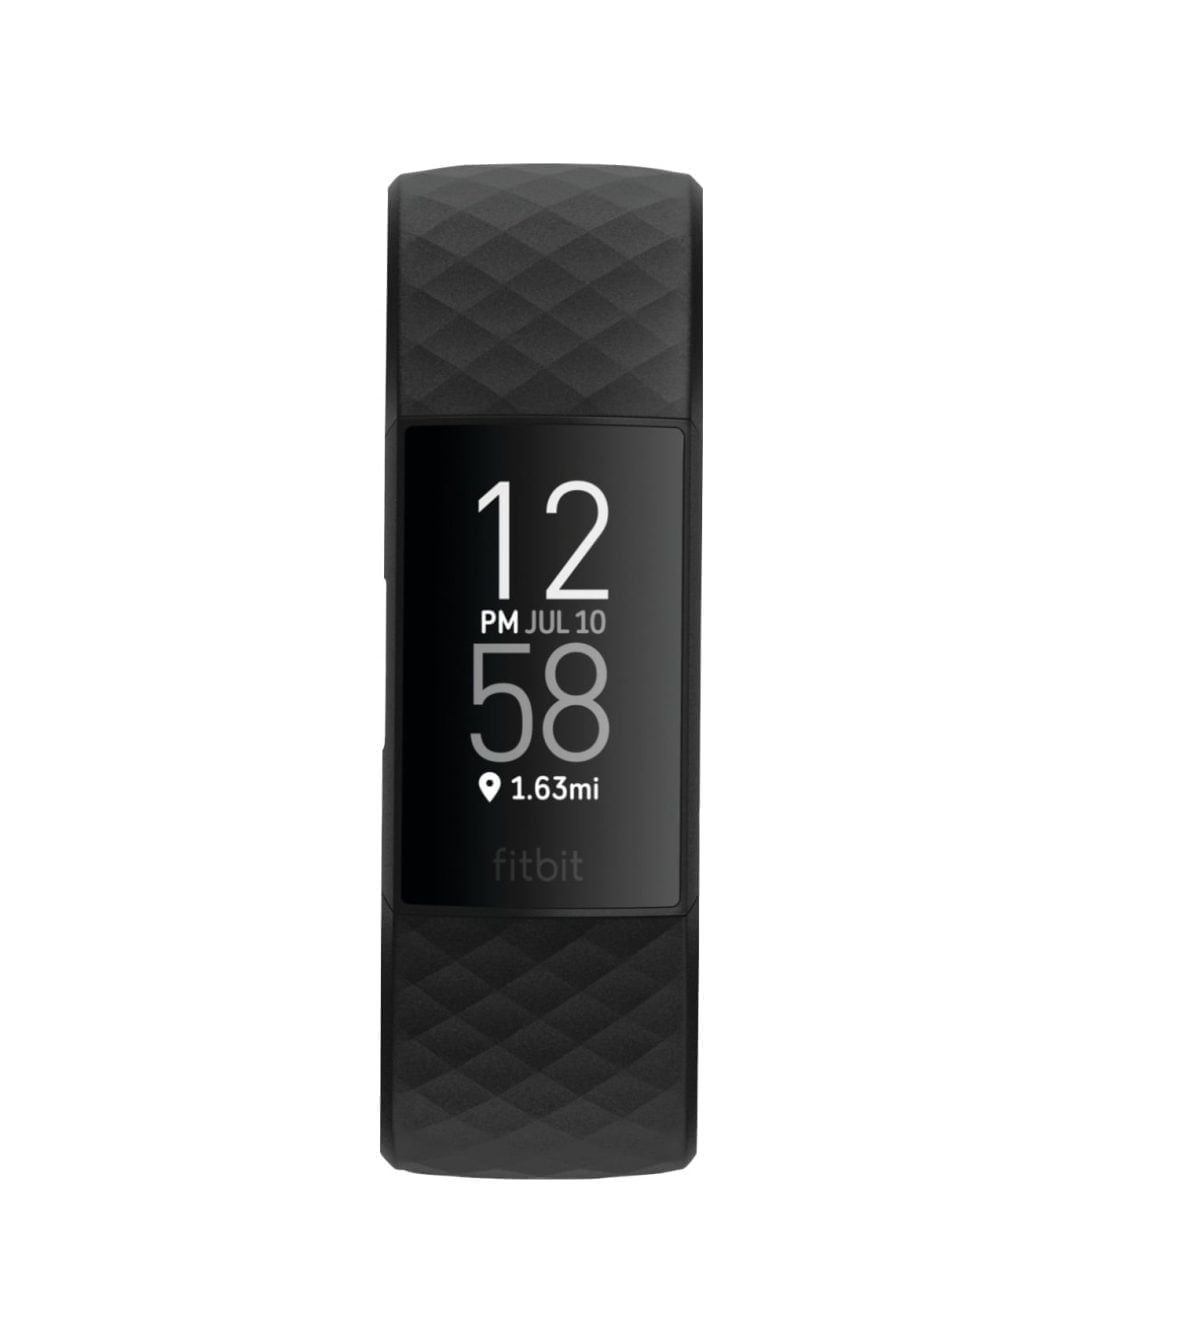 6405752 Sd Fitbit Keep Track Of Time And Listen To Your Favorite Tunes While Exercising With This Black Fitbit Charge 4 Activity Tracker. The Built-In Gps Tracks Your Outdoor Runs, Displaying The Distance Covered, While The Intuitive Touchscreen Delivers Vivid Visuals And Easy Operation. This Fitbit Charge 4 Activity Tracker Has A Rechargeable Battery That Offers Up To 7 Days Of Use, And The Swim-Proof Design Lets You Log Pool Workouts. &Lt;Ul&Gt; &Lt;Li&Gt;Measures Calories Burned And Heart Rate&Lt;/Li&Gt; &Lt;Li&Gt;Comprehensive Monitoring&Lt;/Li&Gt; &Lt;Li&Gt;Sleep Tracking&Lt;/Li&Gt; &Lt;Li&Gt;Backlit Led Display&Lt;/Li&Gt; &Lt;Li&Gt;Fitbit Pay&Lt;/Li&Gt; &Lt;Li&Gt;Active Zone Minutes&Lt;/Li&Gt; &Lt;Li&Gt;Built-In Gps&Lt;/Li&Gt; &Lt;Li&Gt;Water-Resistant Design&Lt;/Li&Gt; &Lt;Li&Gt;Syncs To Select Apple® And Android Devices&Lt;/Li&Gt; &Lt;Li&Gt;Rechargeable Battery&Lt;/Li&Gt; &Lt;/Ul&Gt; Fitbit - Charge 4 Activity Tracker Gps + Heart Rate - Black